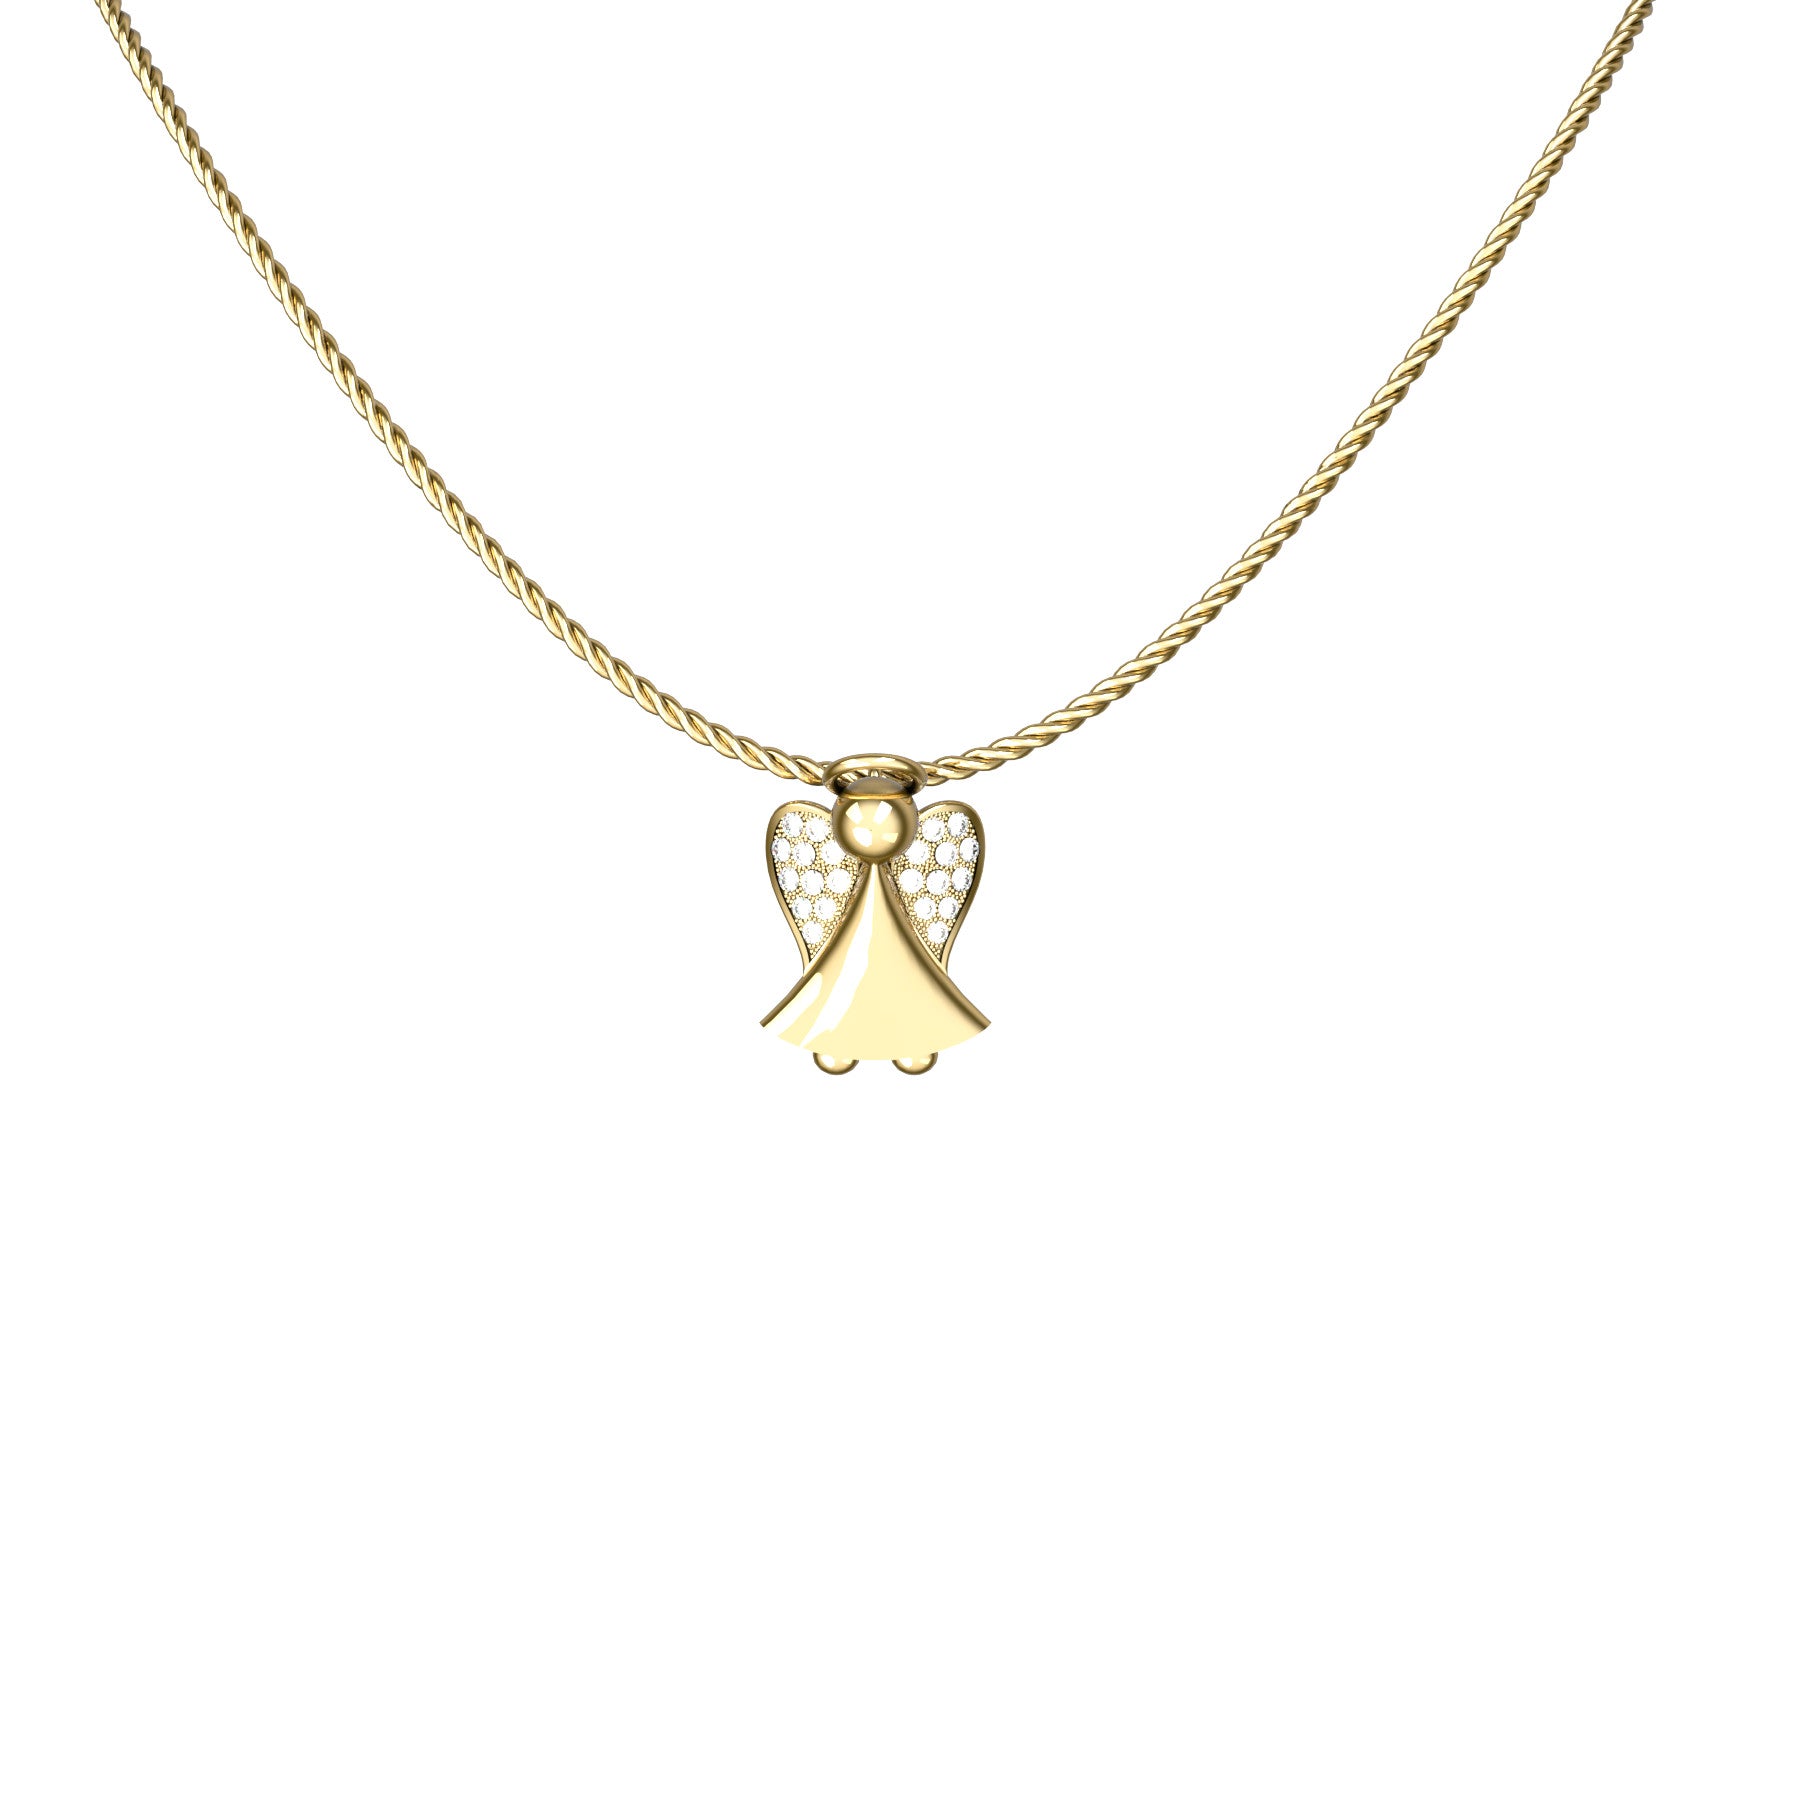 my guardian angel pendant, natural round diamonds, 18 K yellow gold, weight about 3,2 g (0.11oz) size 13,4x19,3 mm